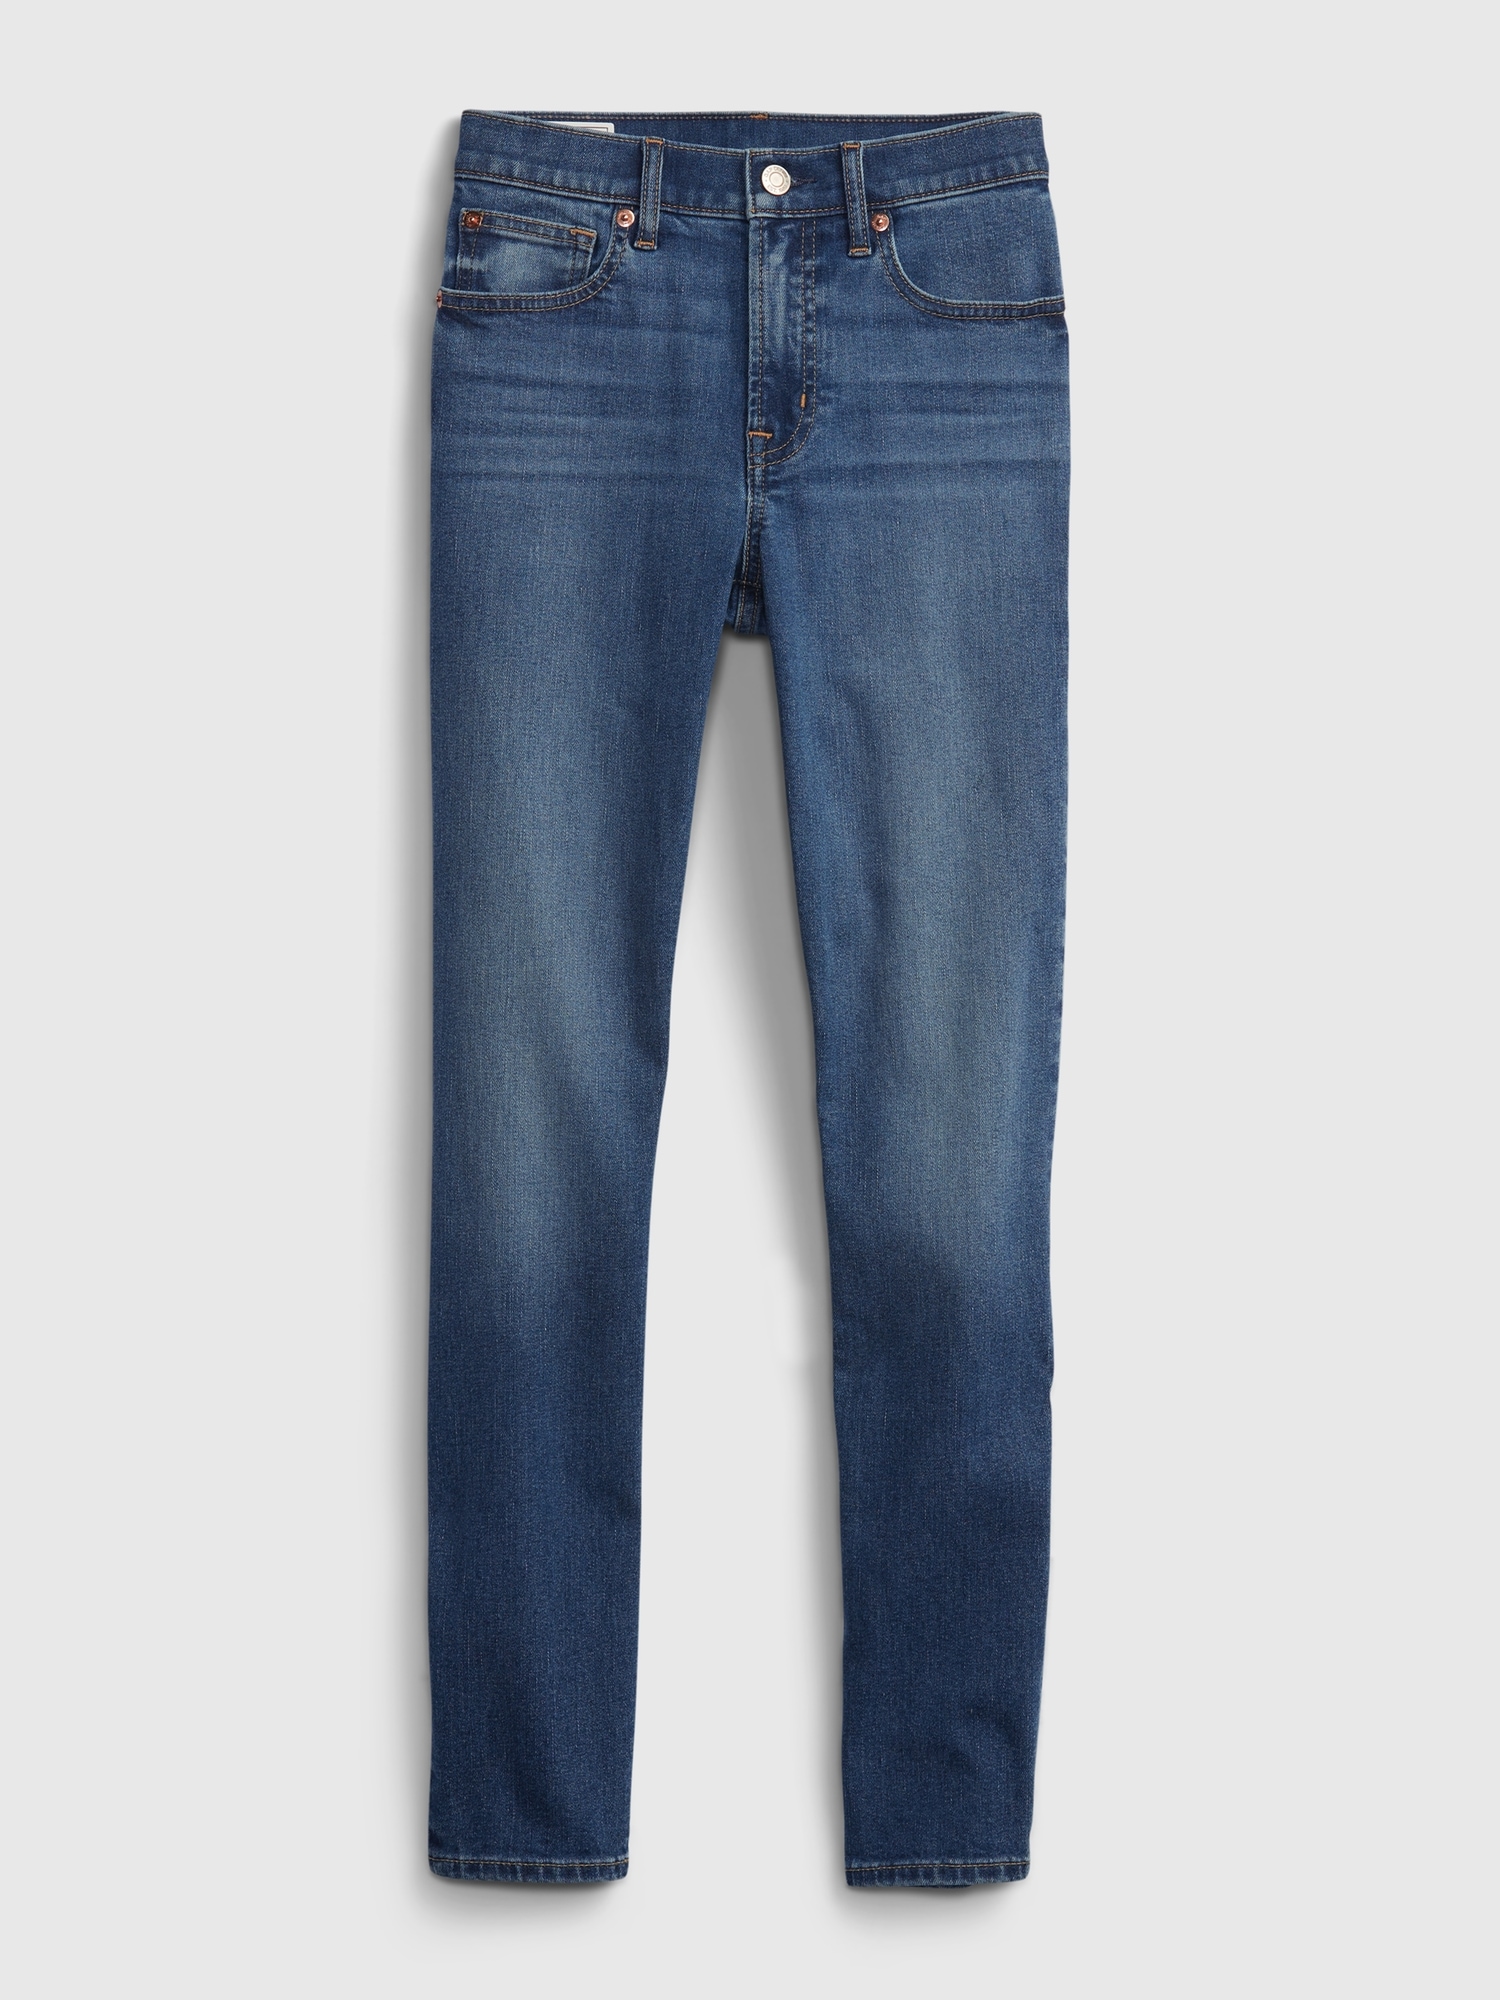 Mid Rise True Skinny Jeans With Washwell Gap